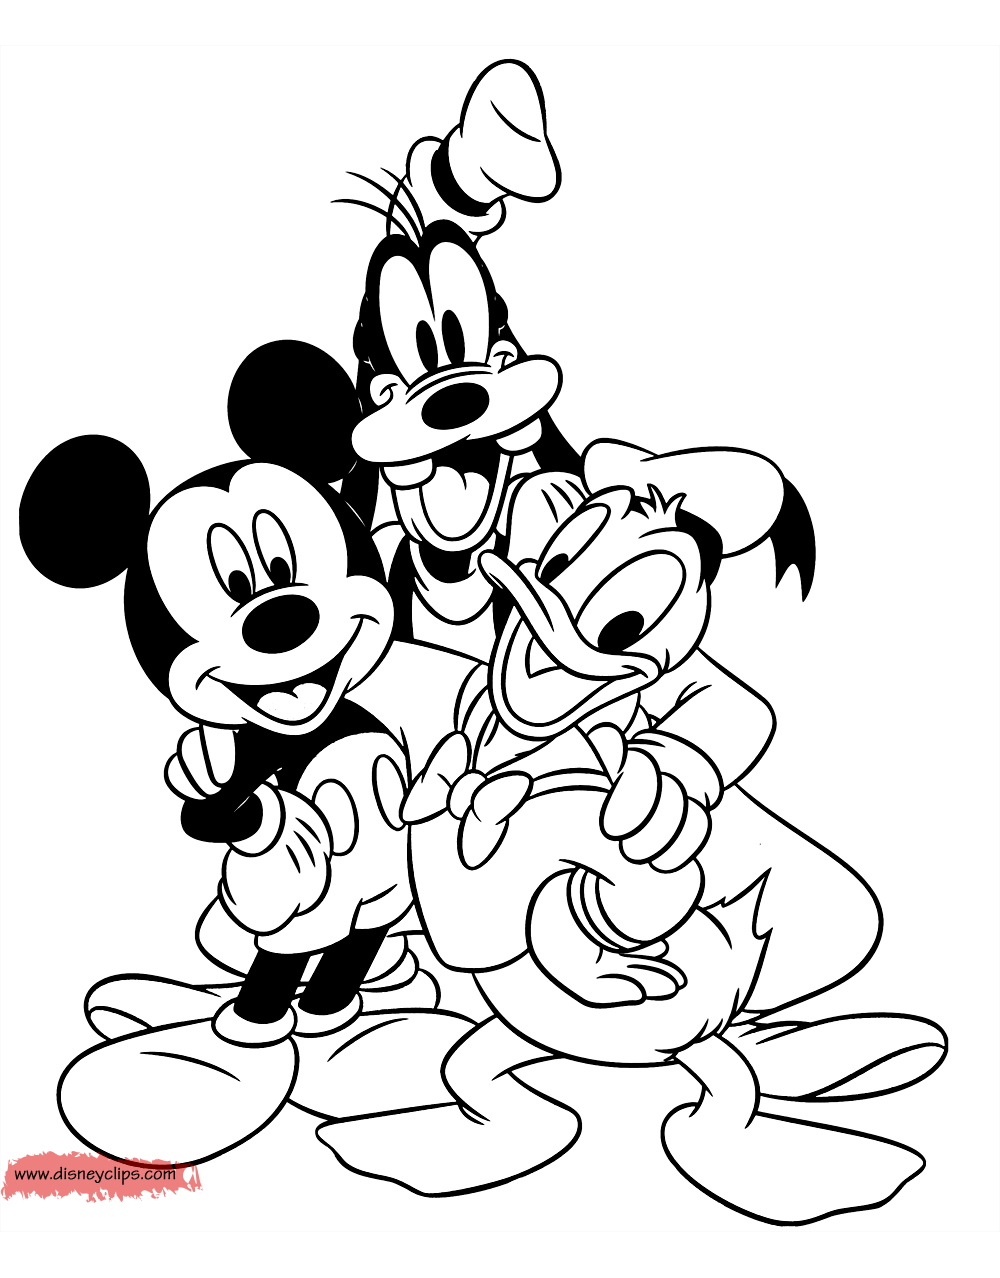 Mickey Mouse & Friends Coloring Pages 2 | Disney's World of Wonders